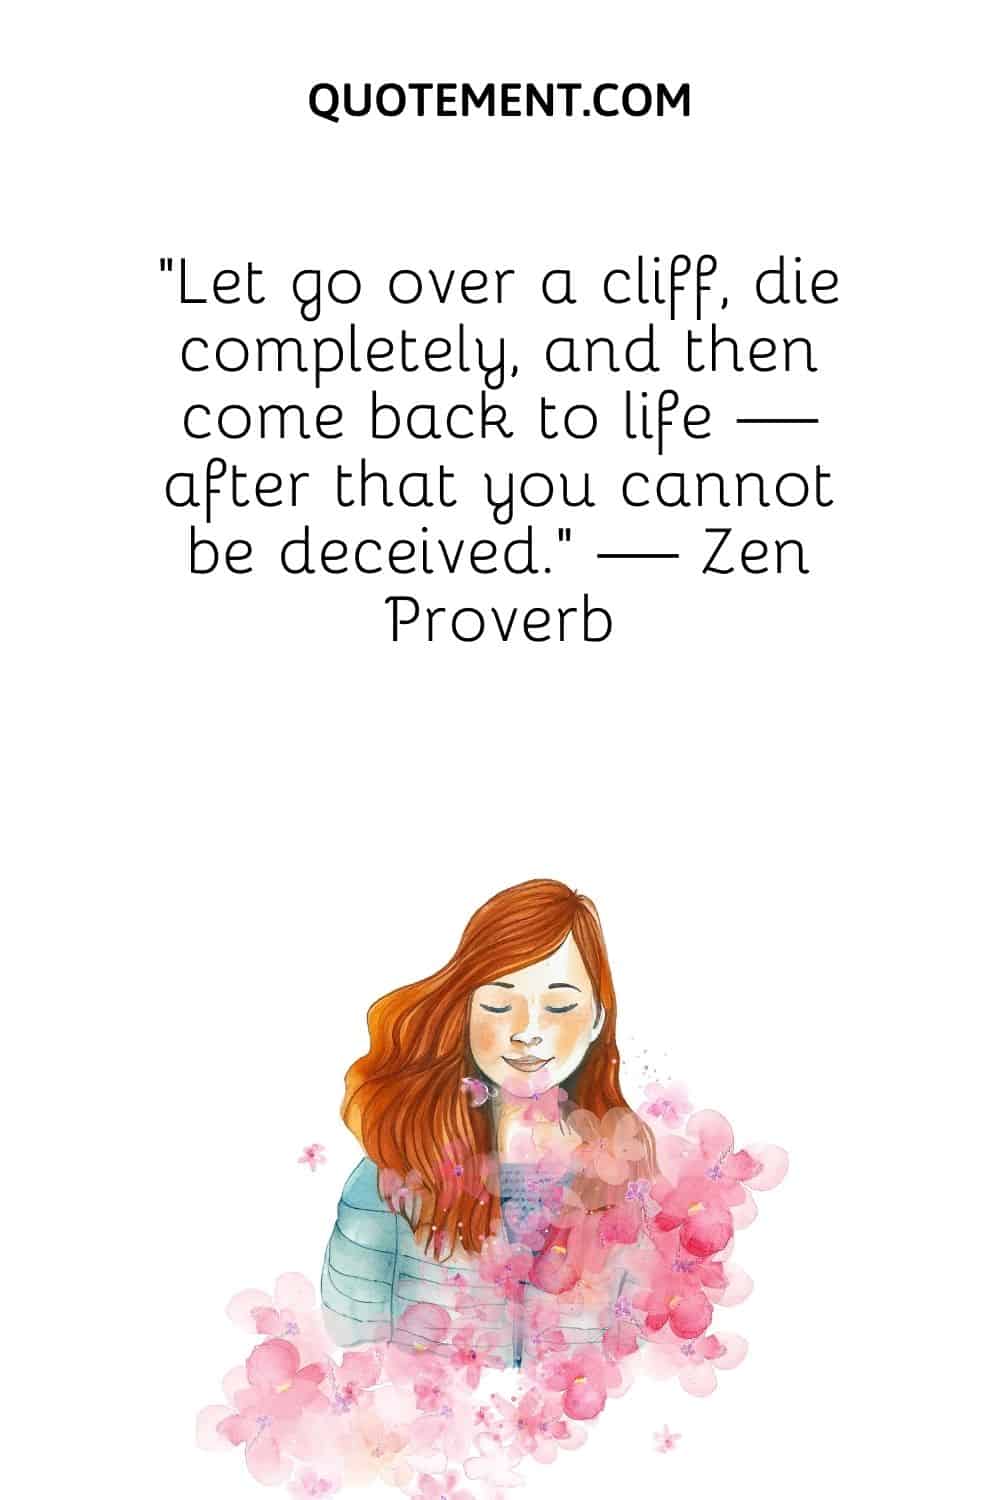 Let go over a cliff, die completely, and then come back to life — after that you cannot be deceived